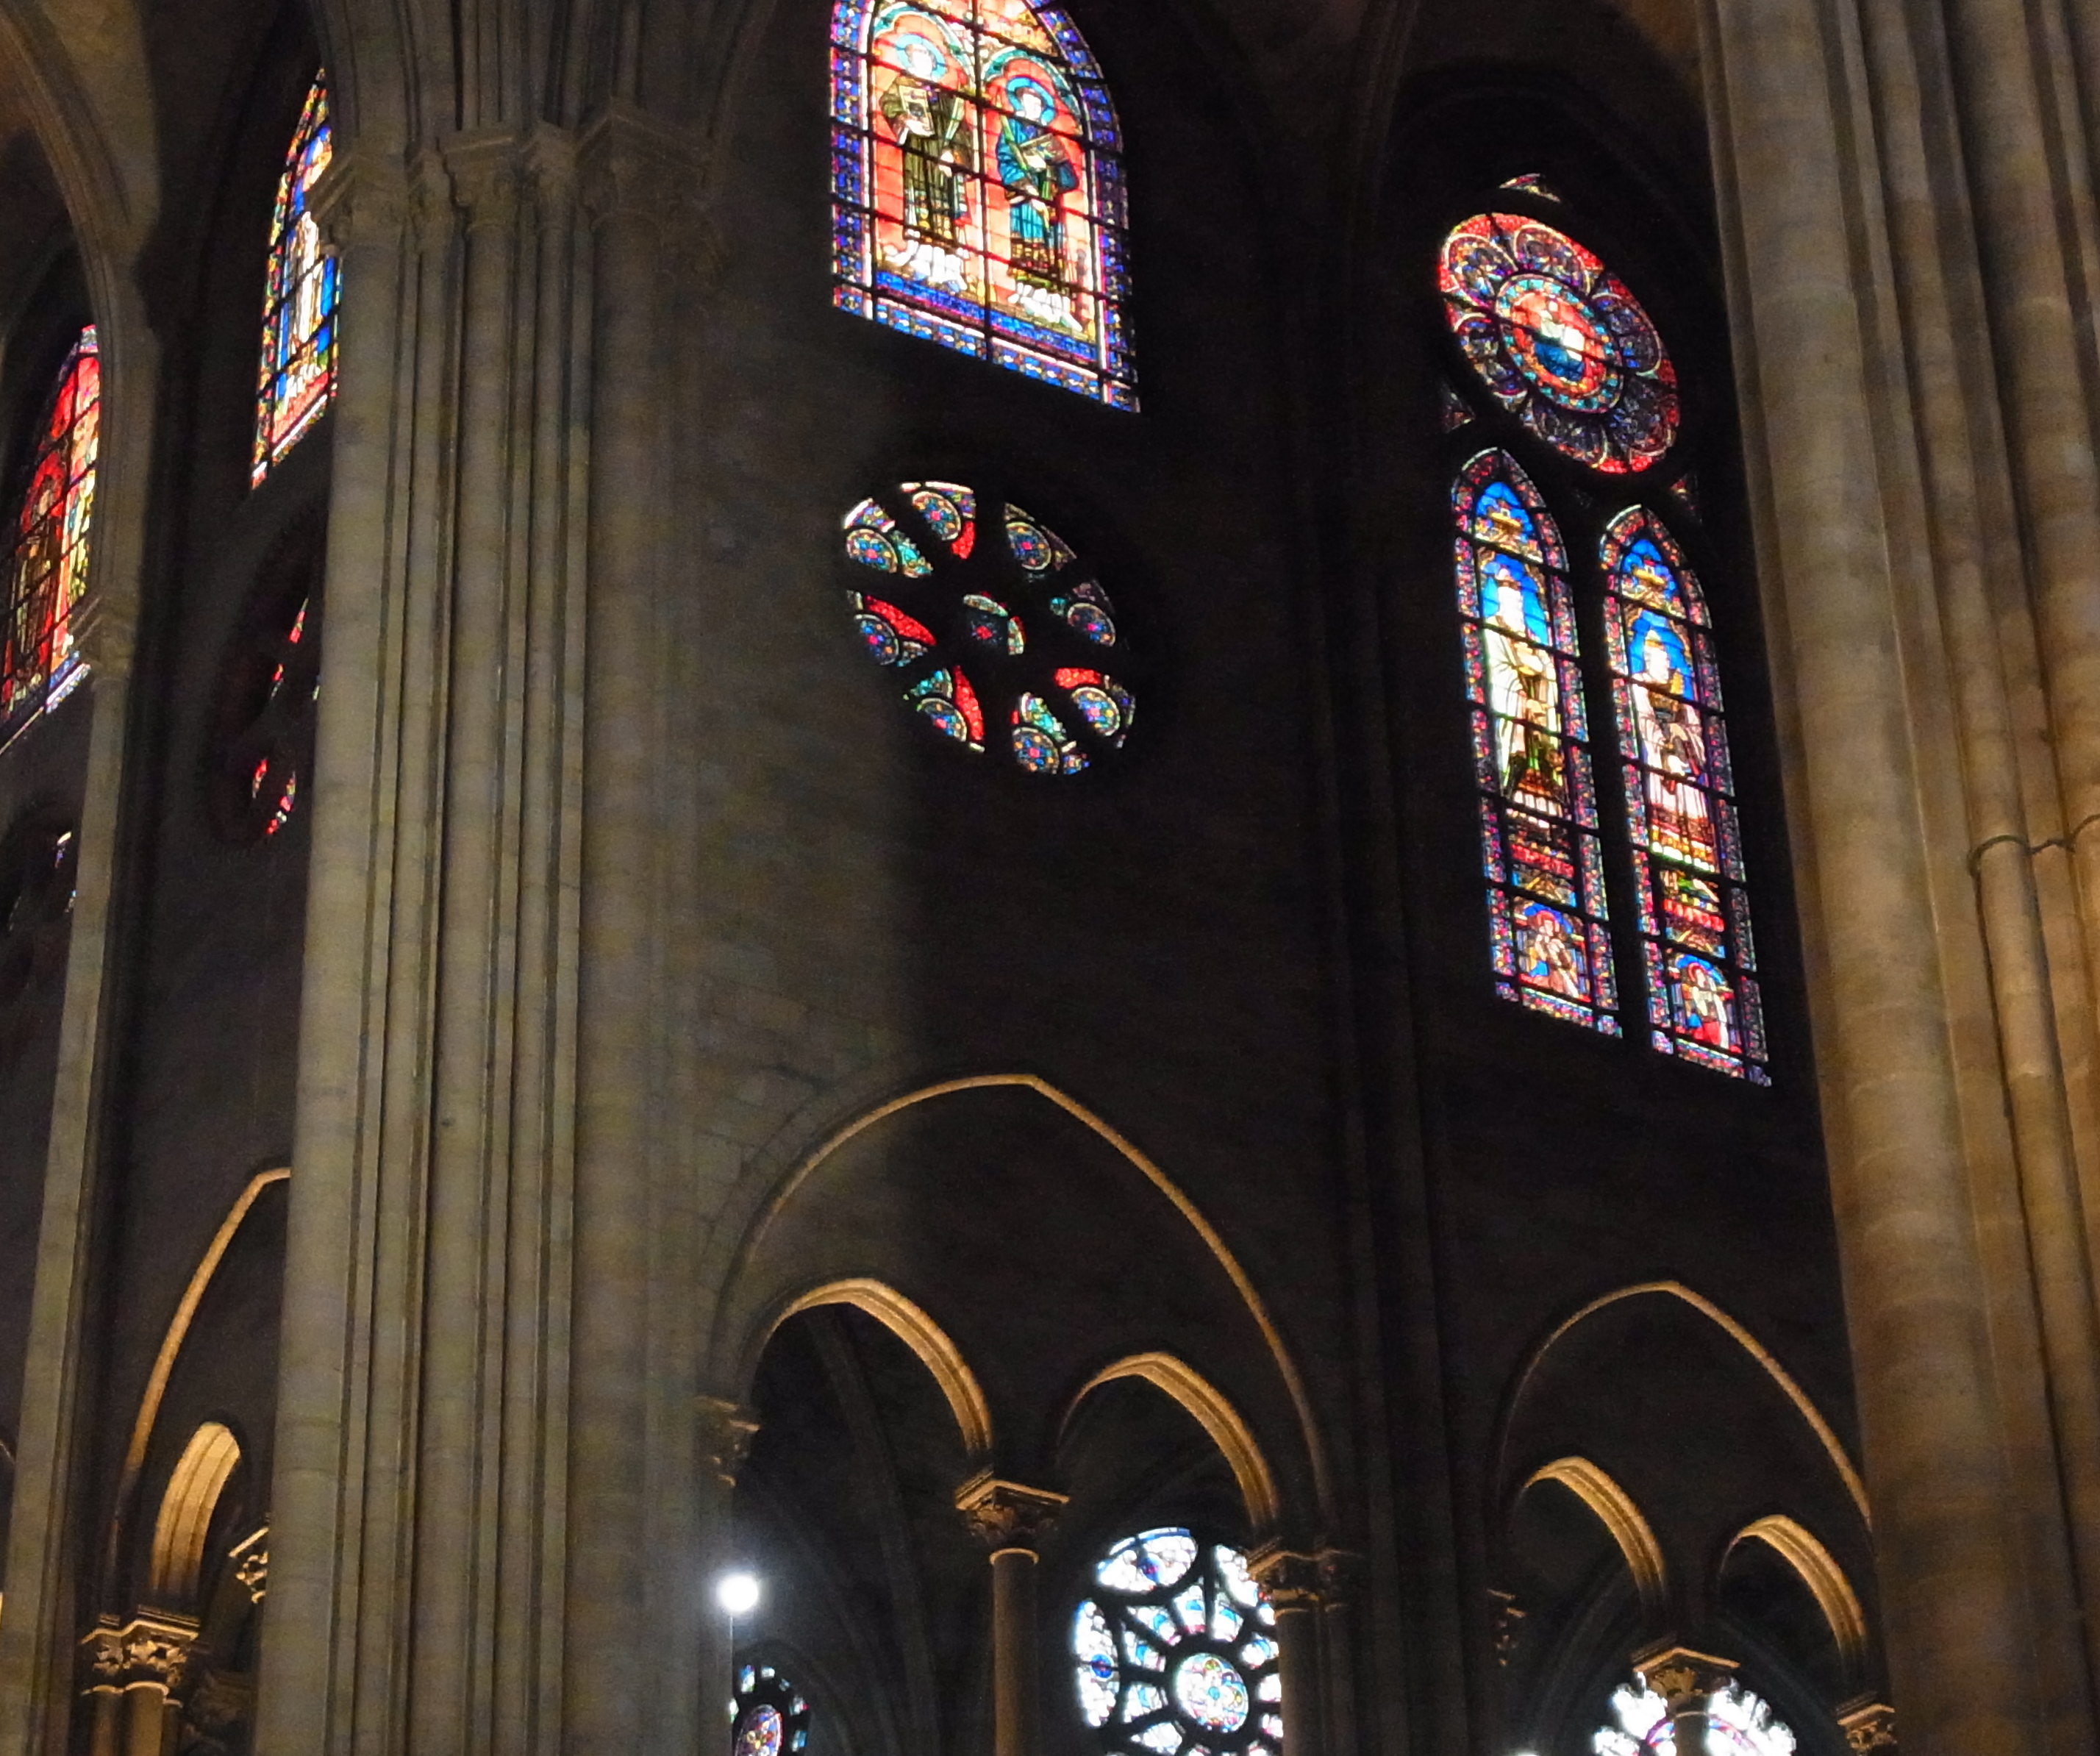 Stained glass windows of Notre-Dame Cathedral in Paris